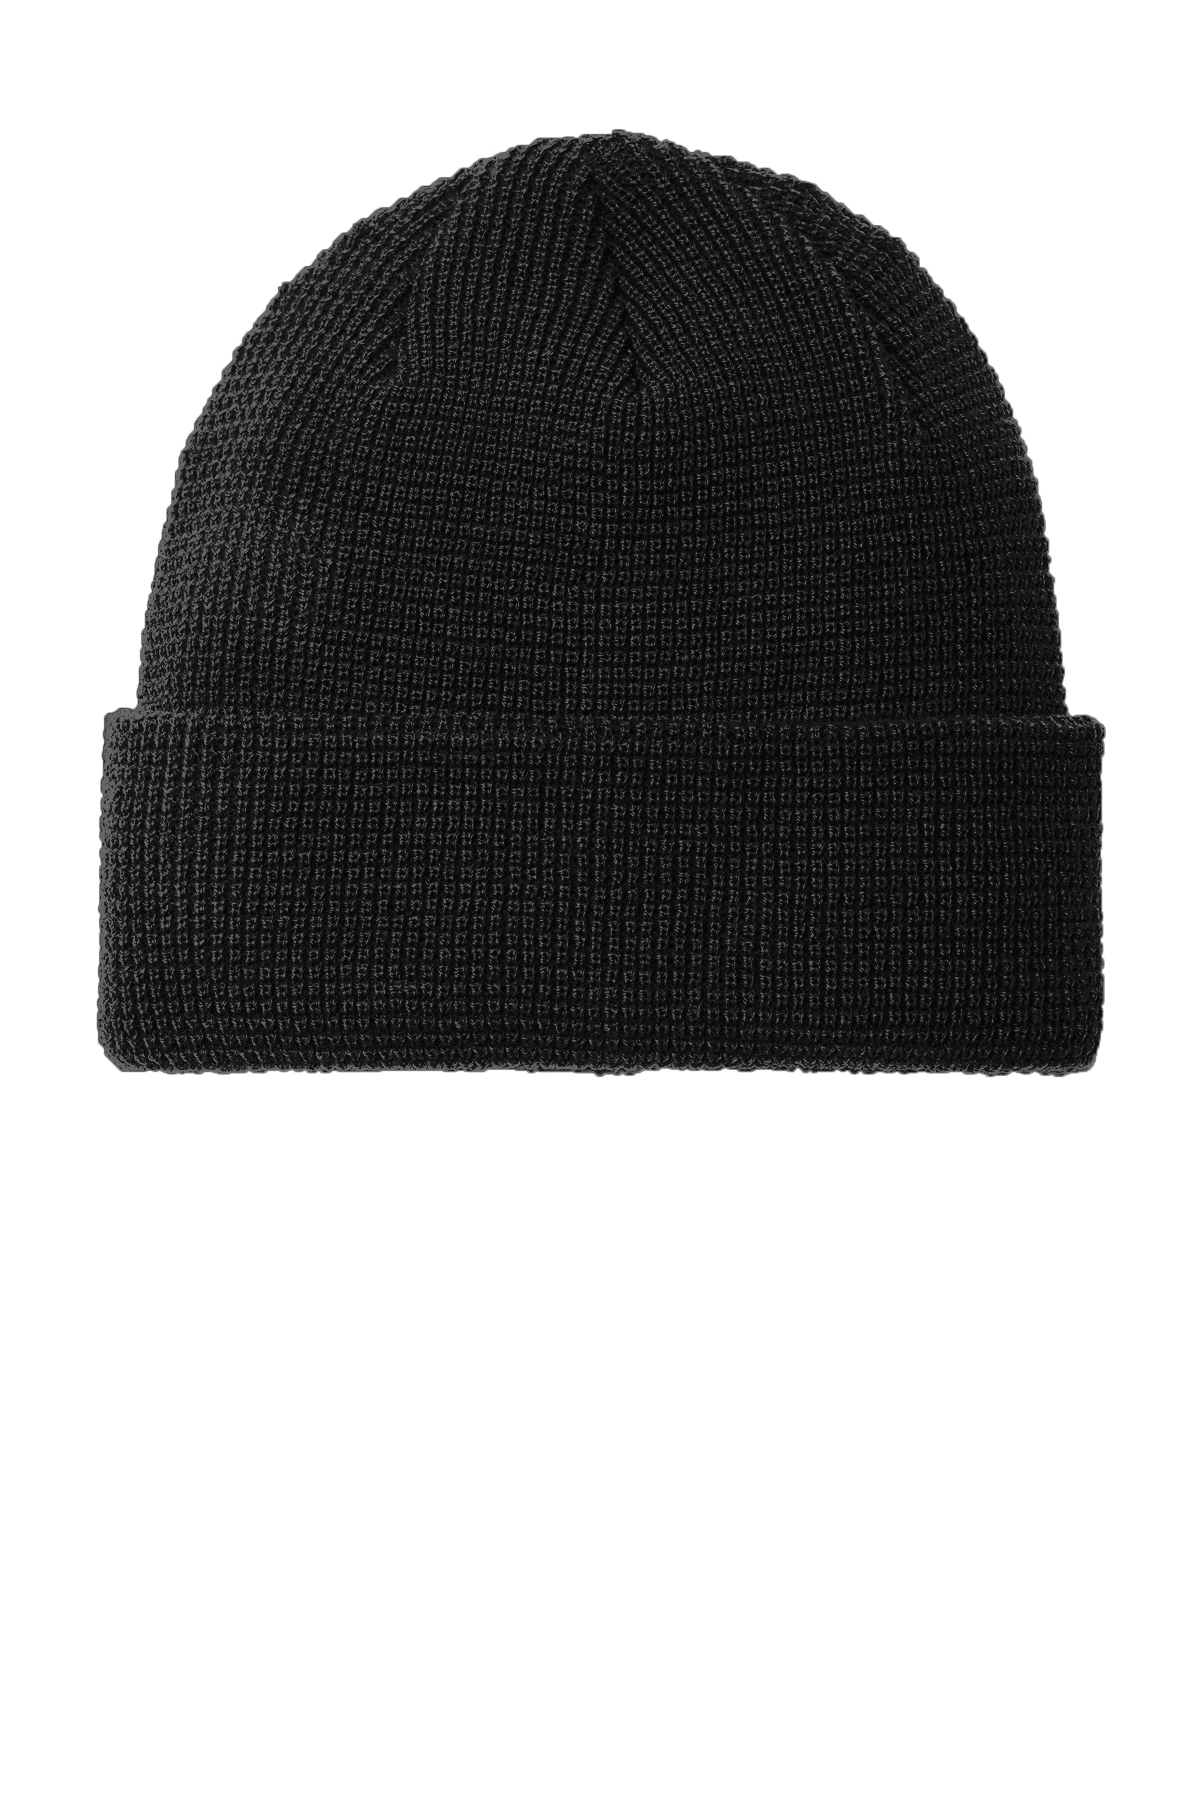 Port Authority Thermal Knit Cuffed Beanie | Product | Port Authority